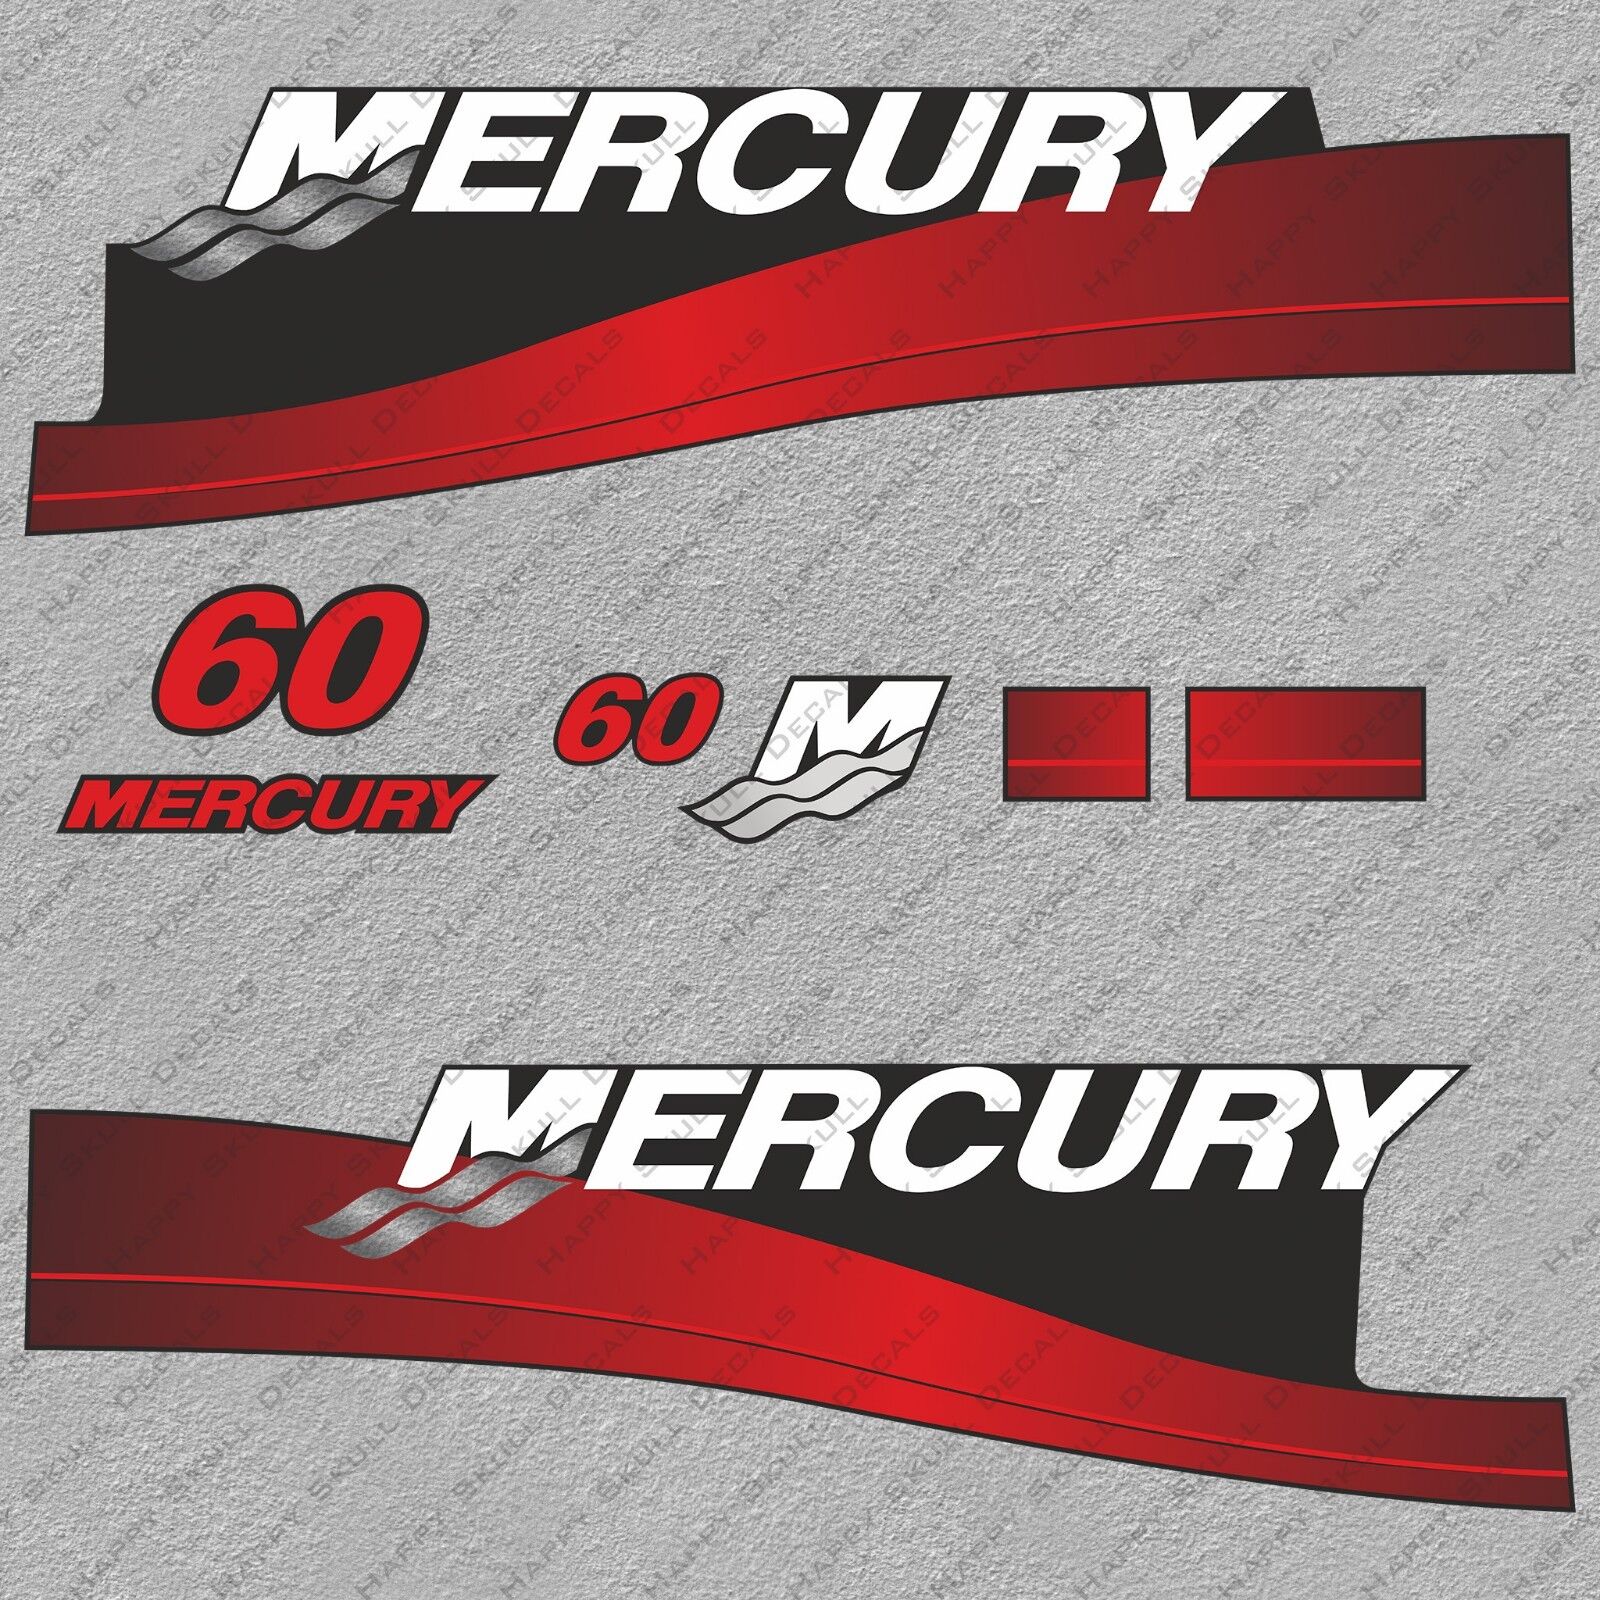 Mercury 60 hp Two Stroke outboard engine decals sticker set reproduction 60HP